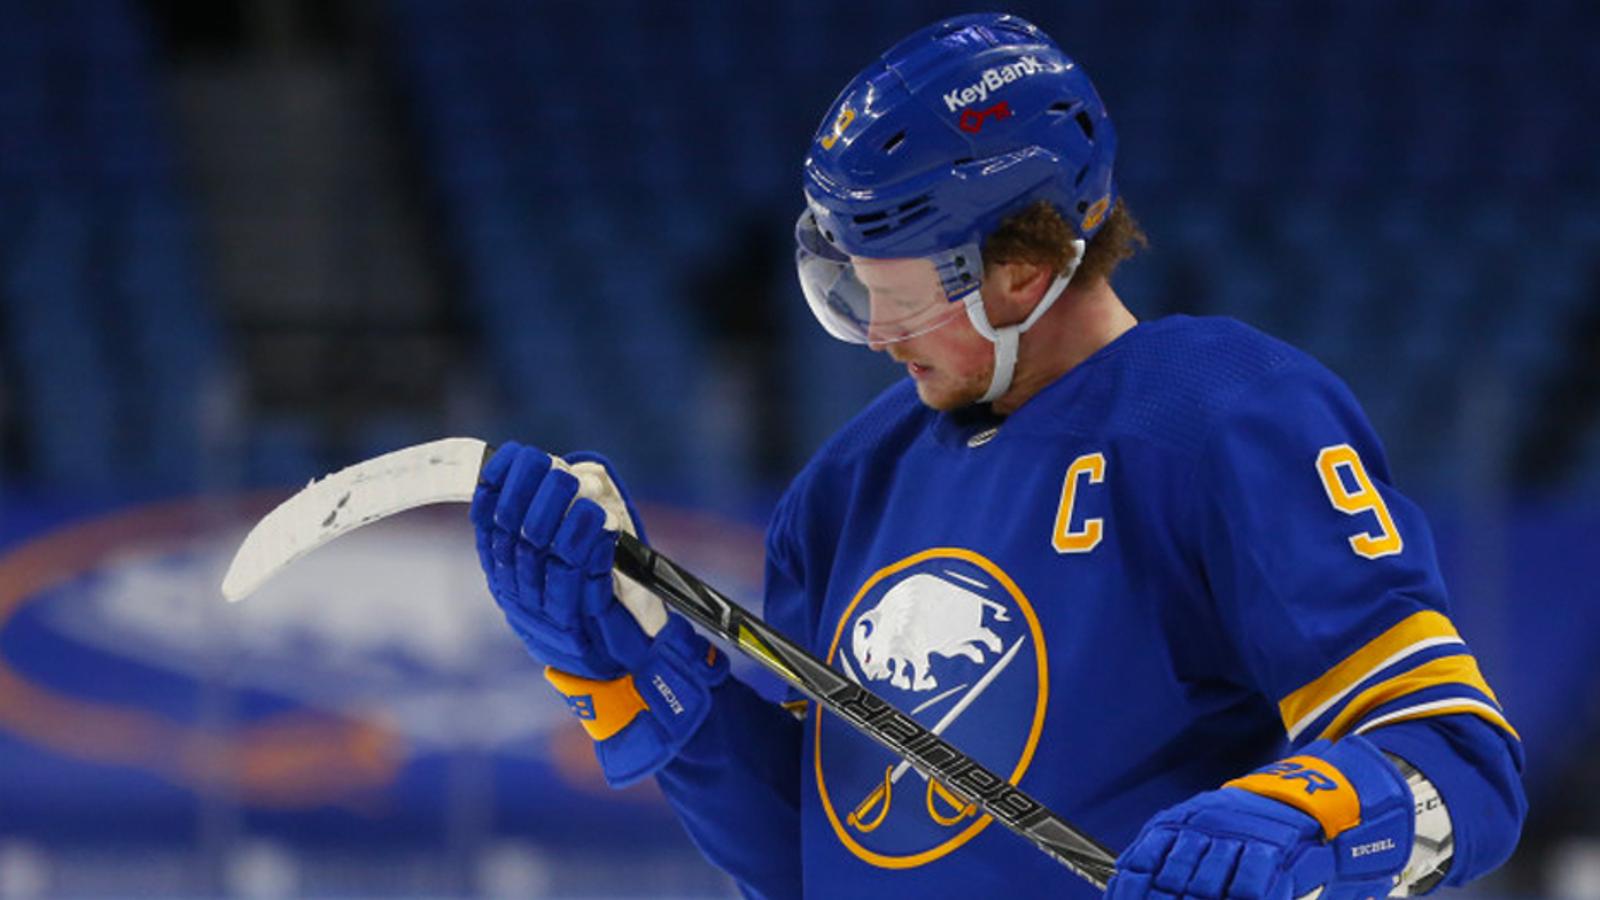 Rumor: Jack Eichel doubtful to play this season even if he gets traded 